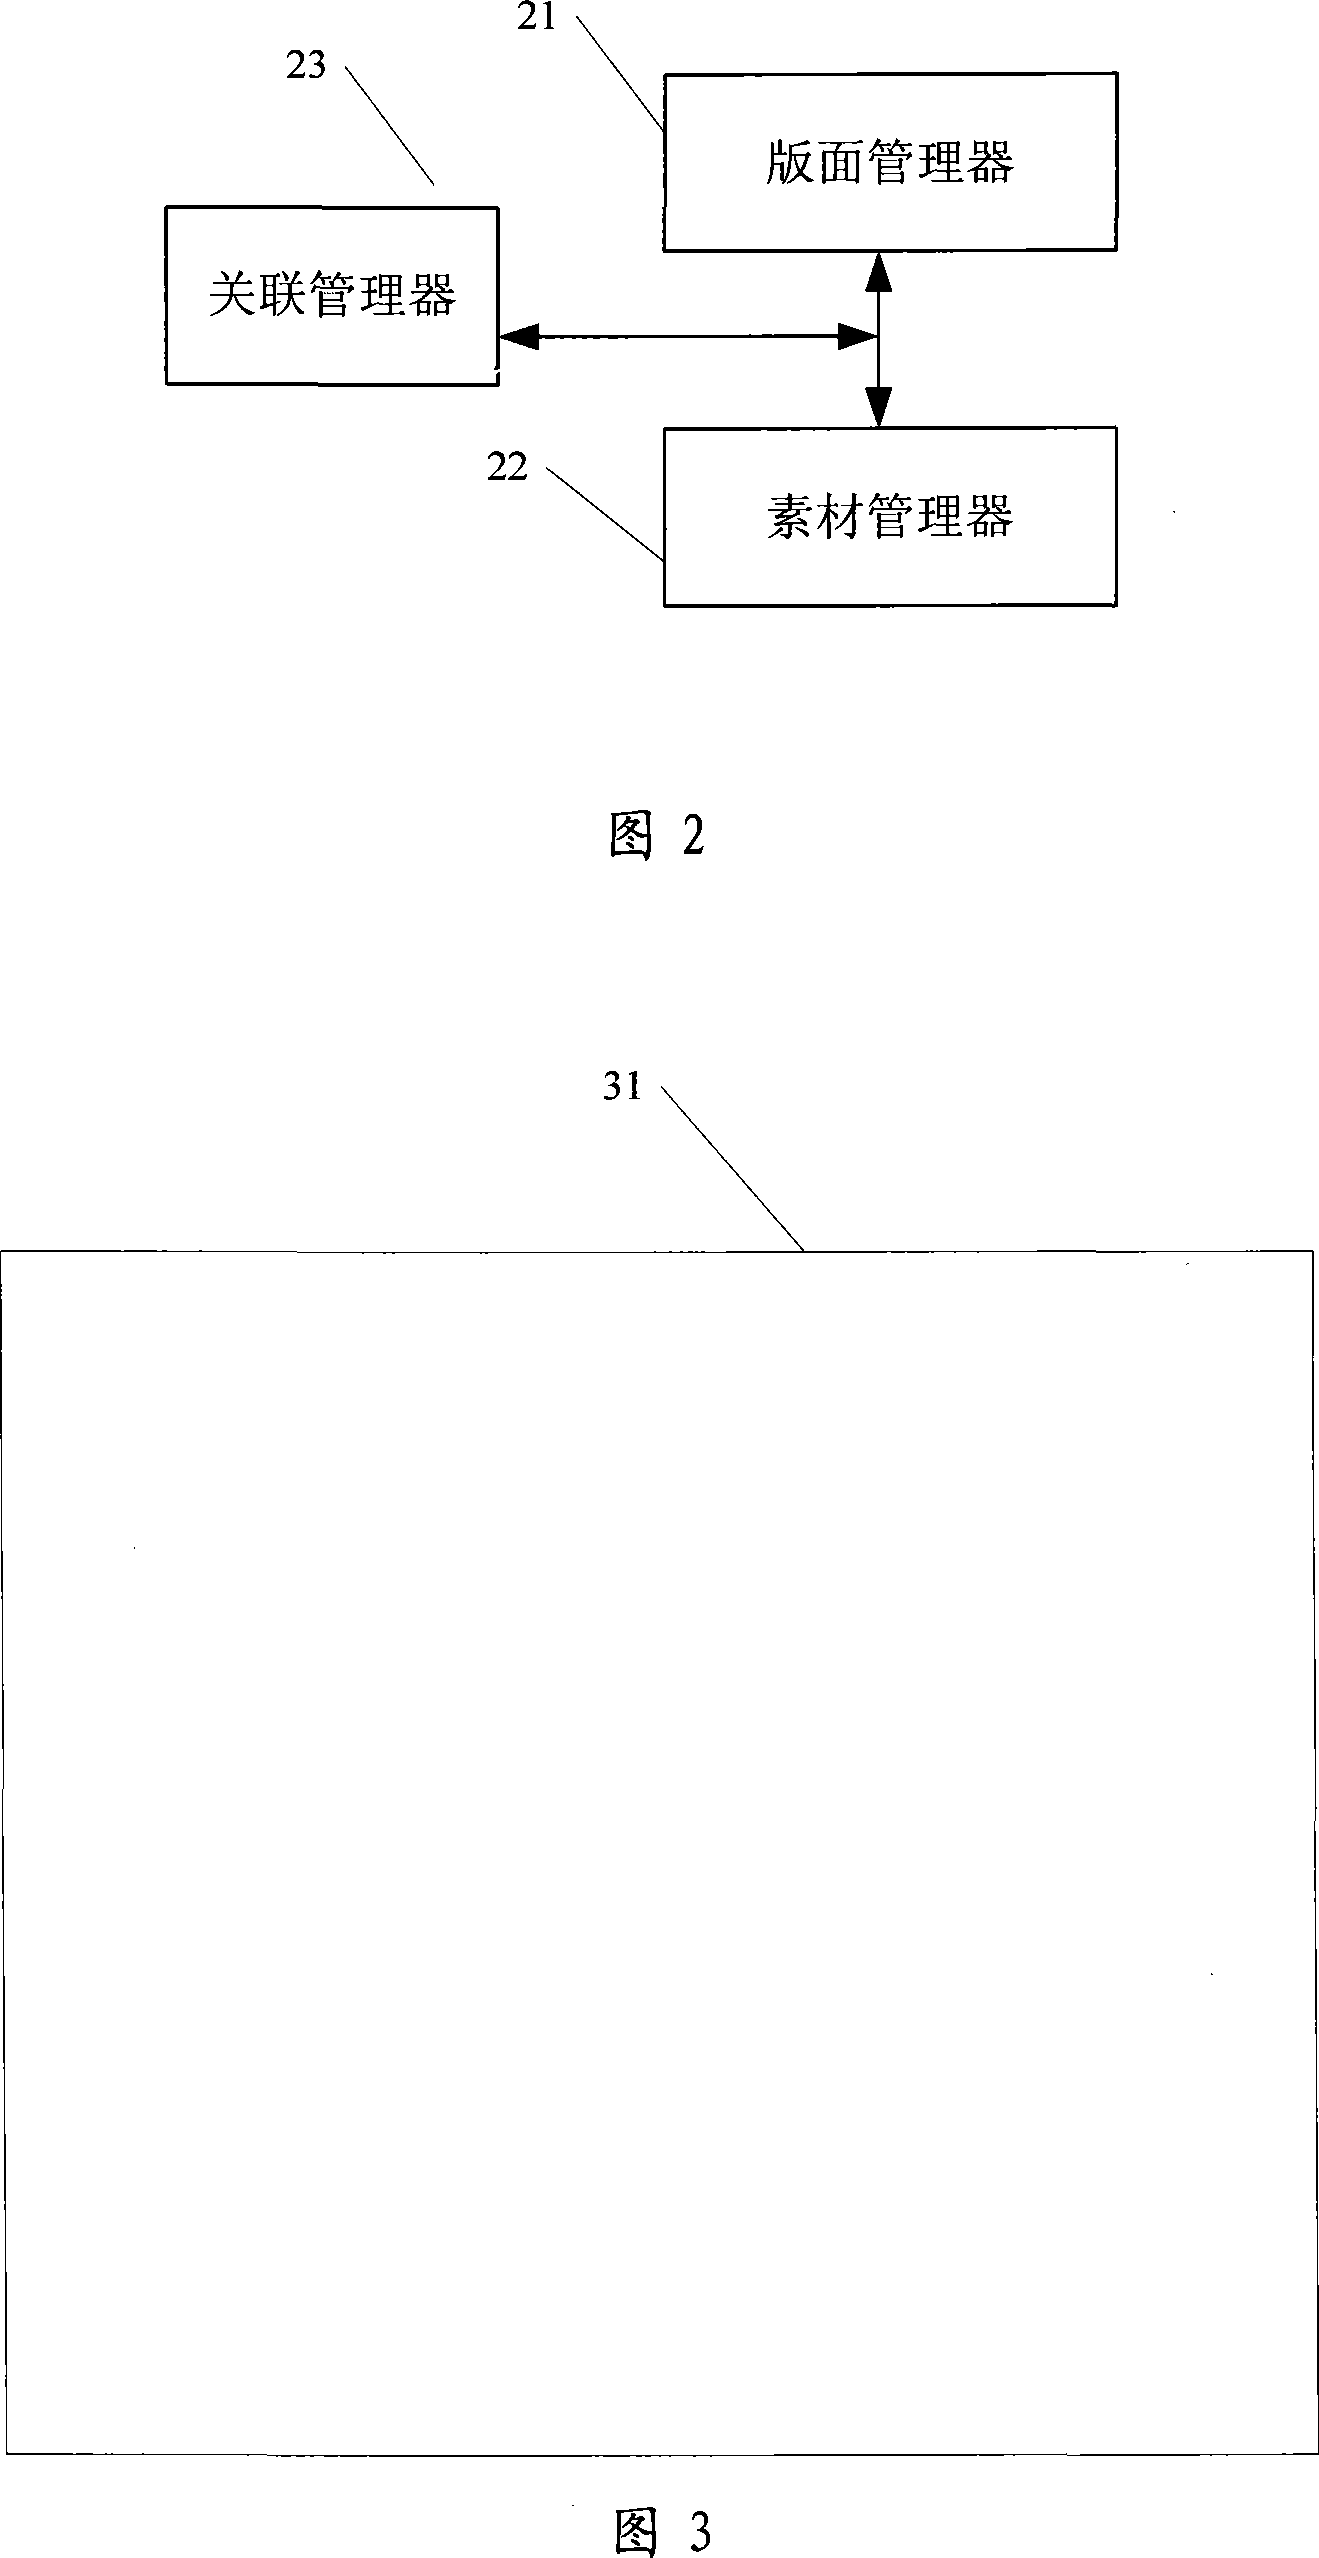 Method and system for implementing pre-typesetting